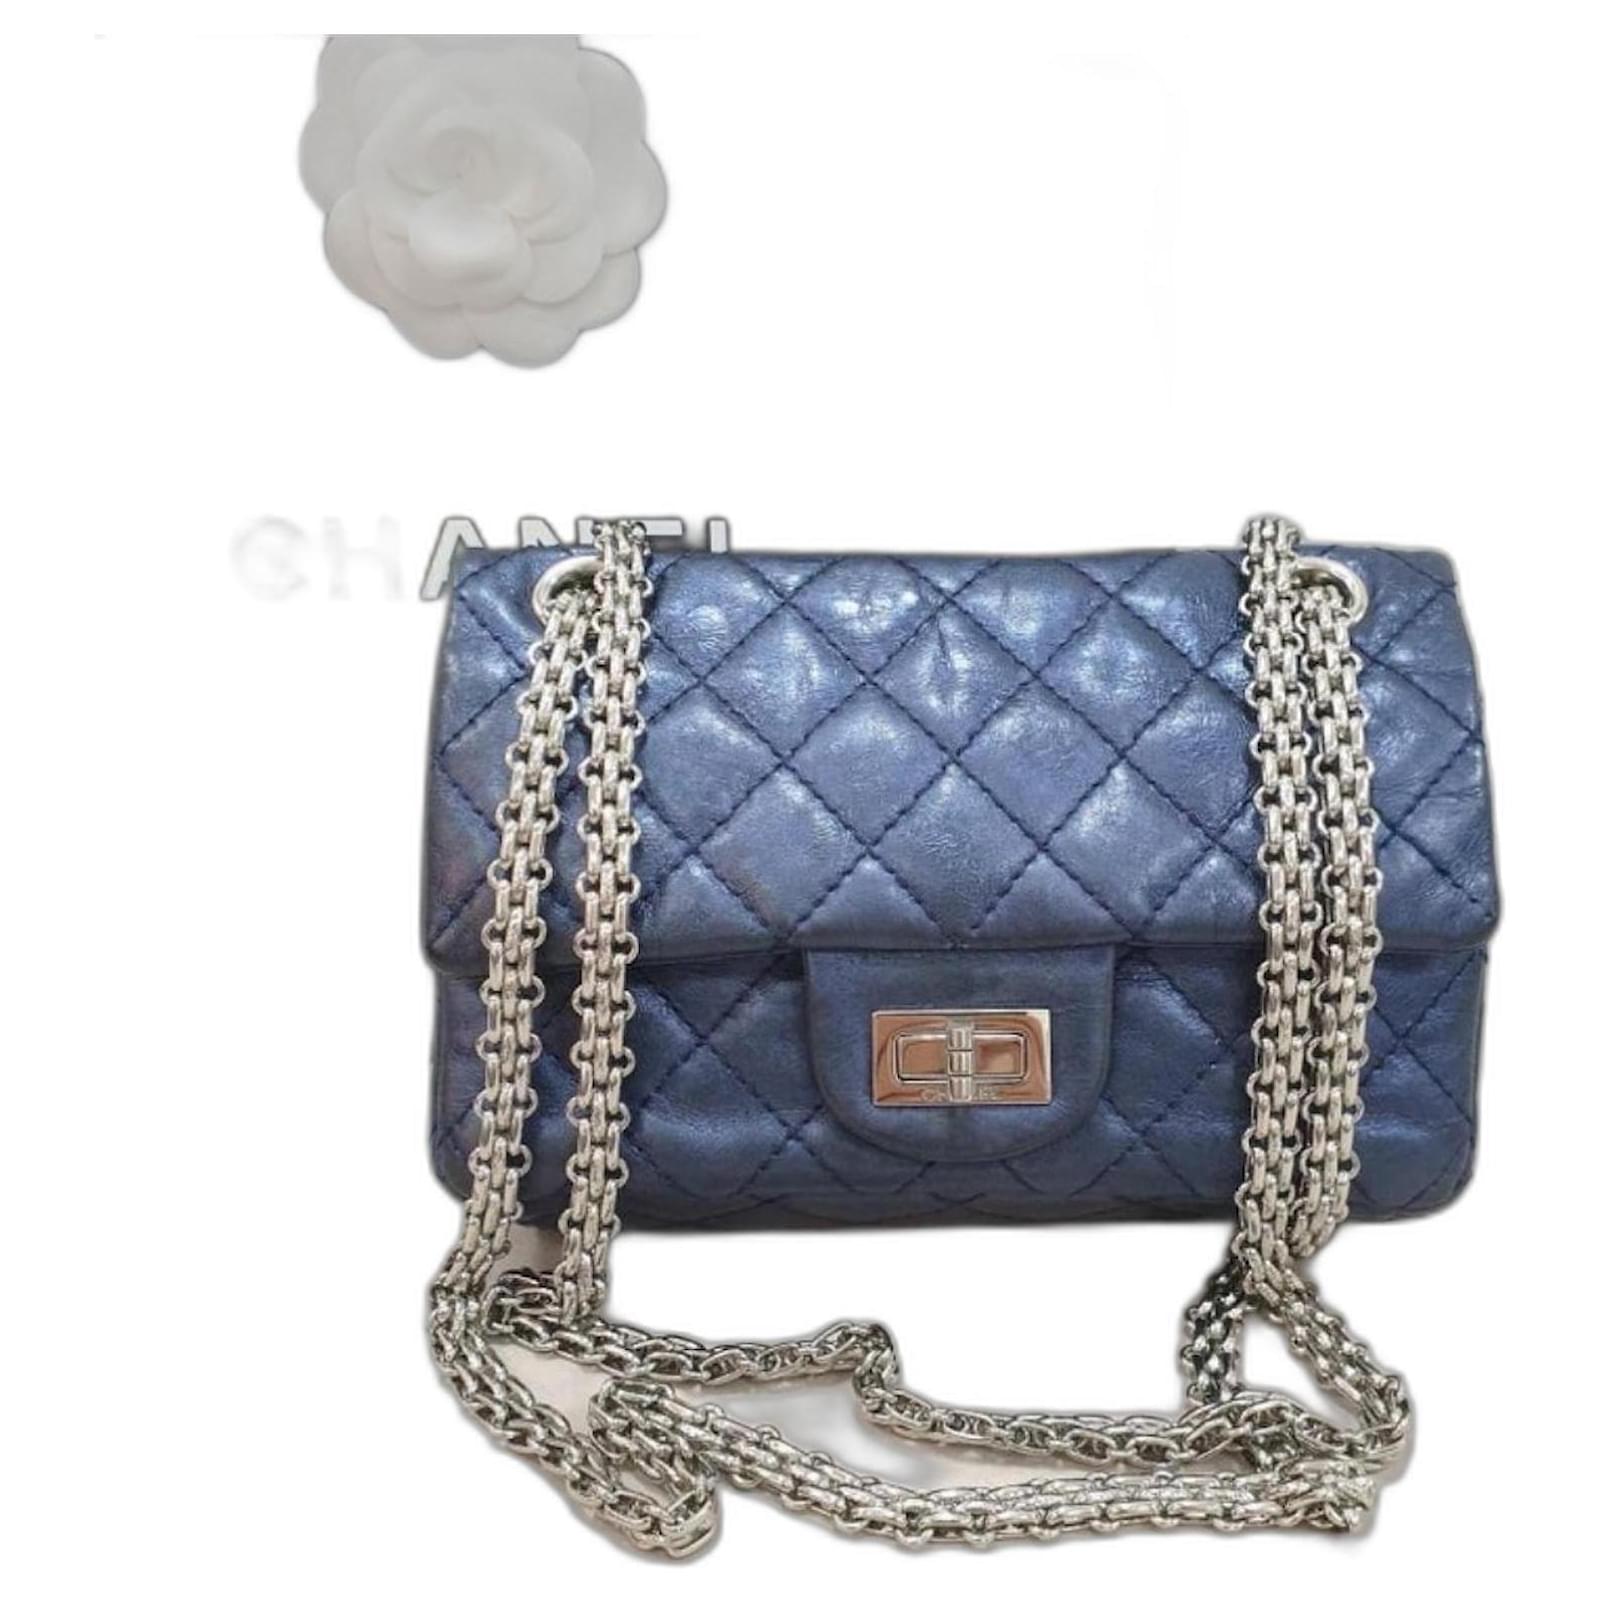 Handbags Chanel Chanel Metallic Blue Quilted Leather Reissue 2.55 Classic Flap Bag